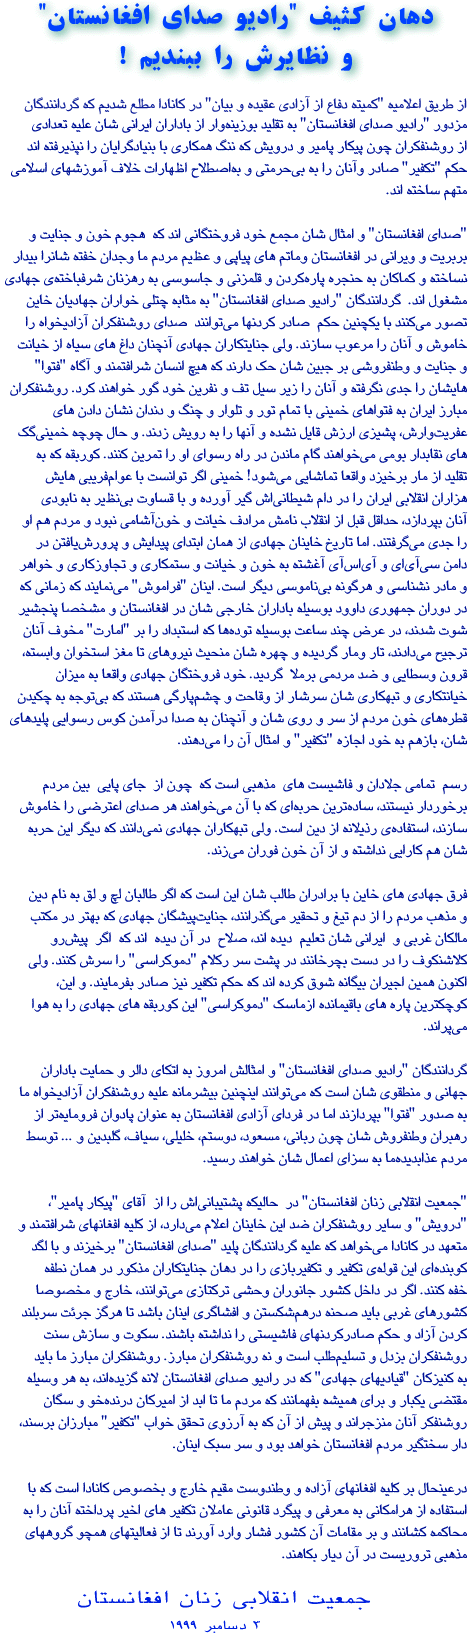 RAWA statement againt remarks of "Radio Afghanistan Voice"